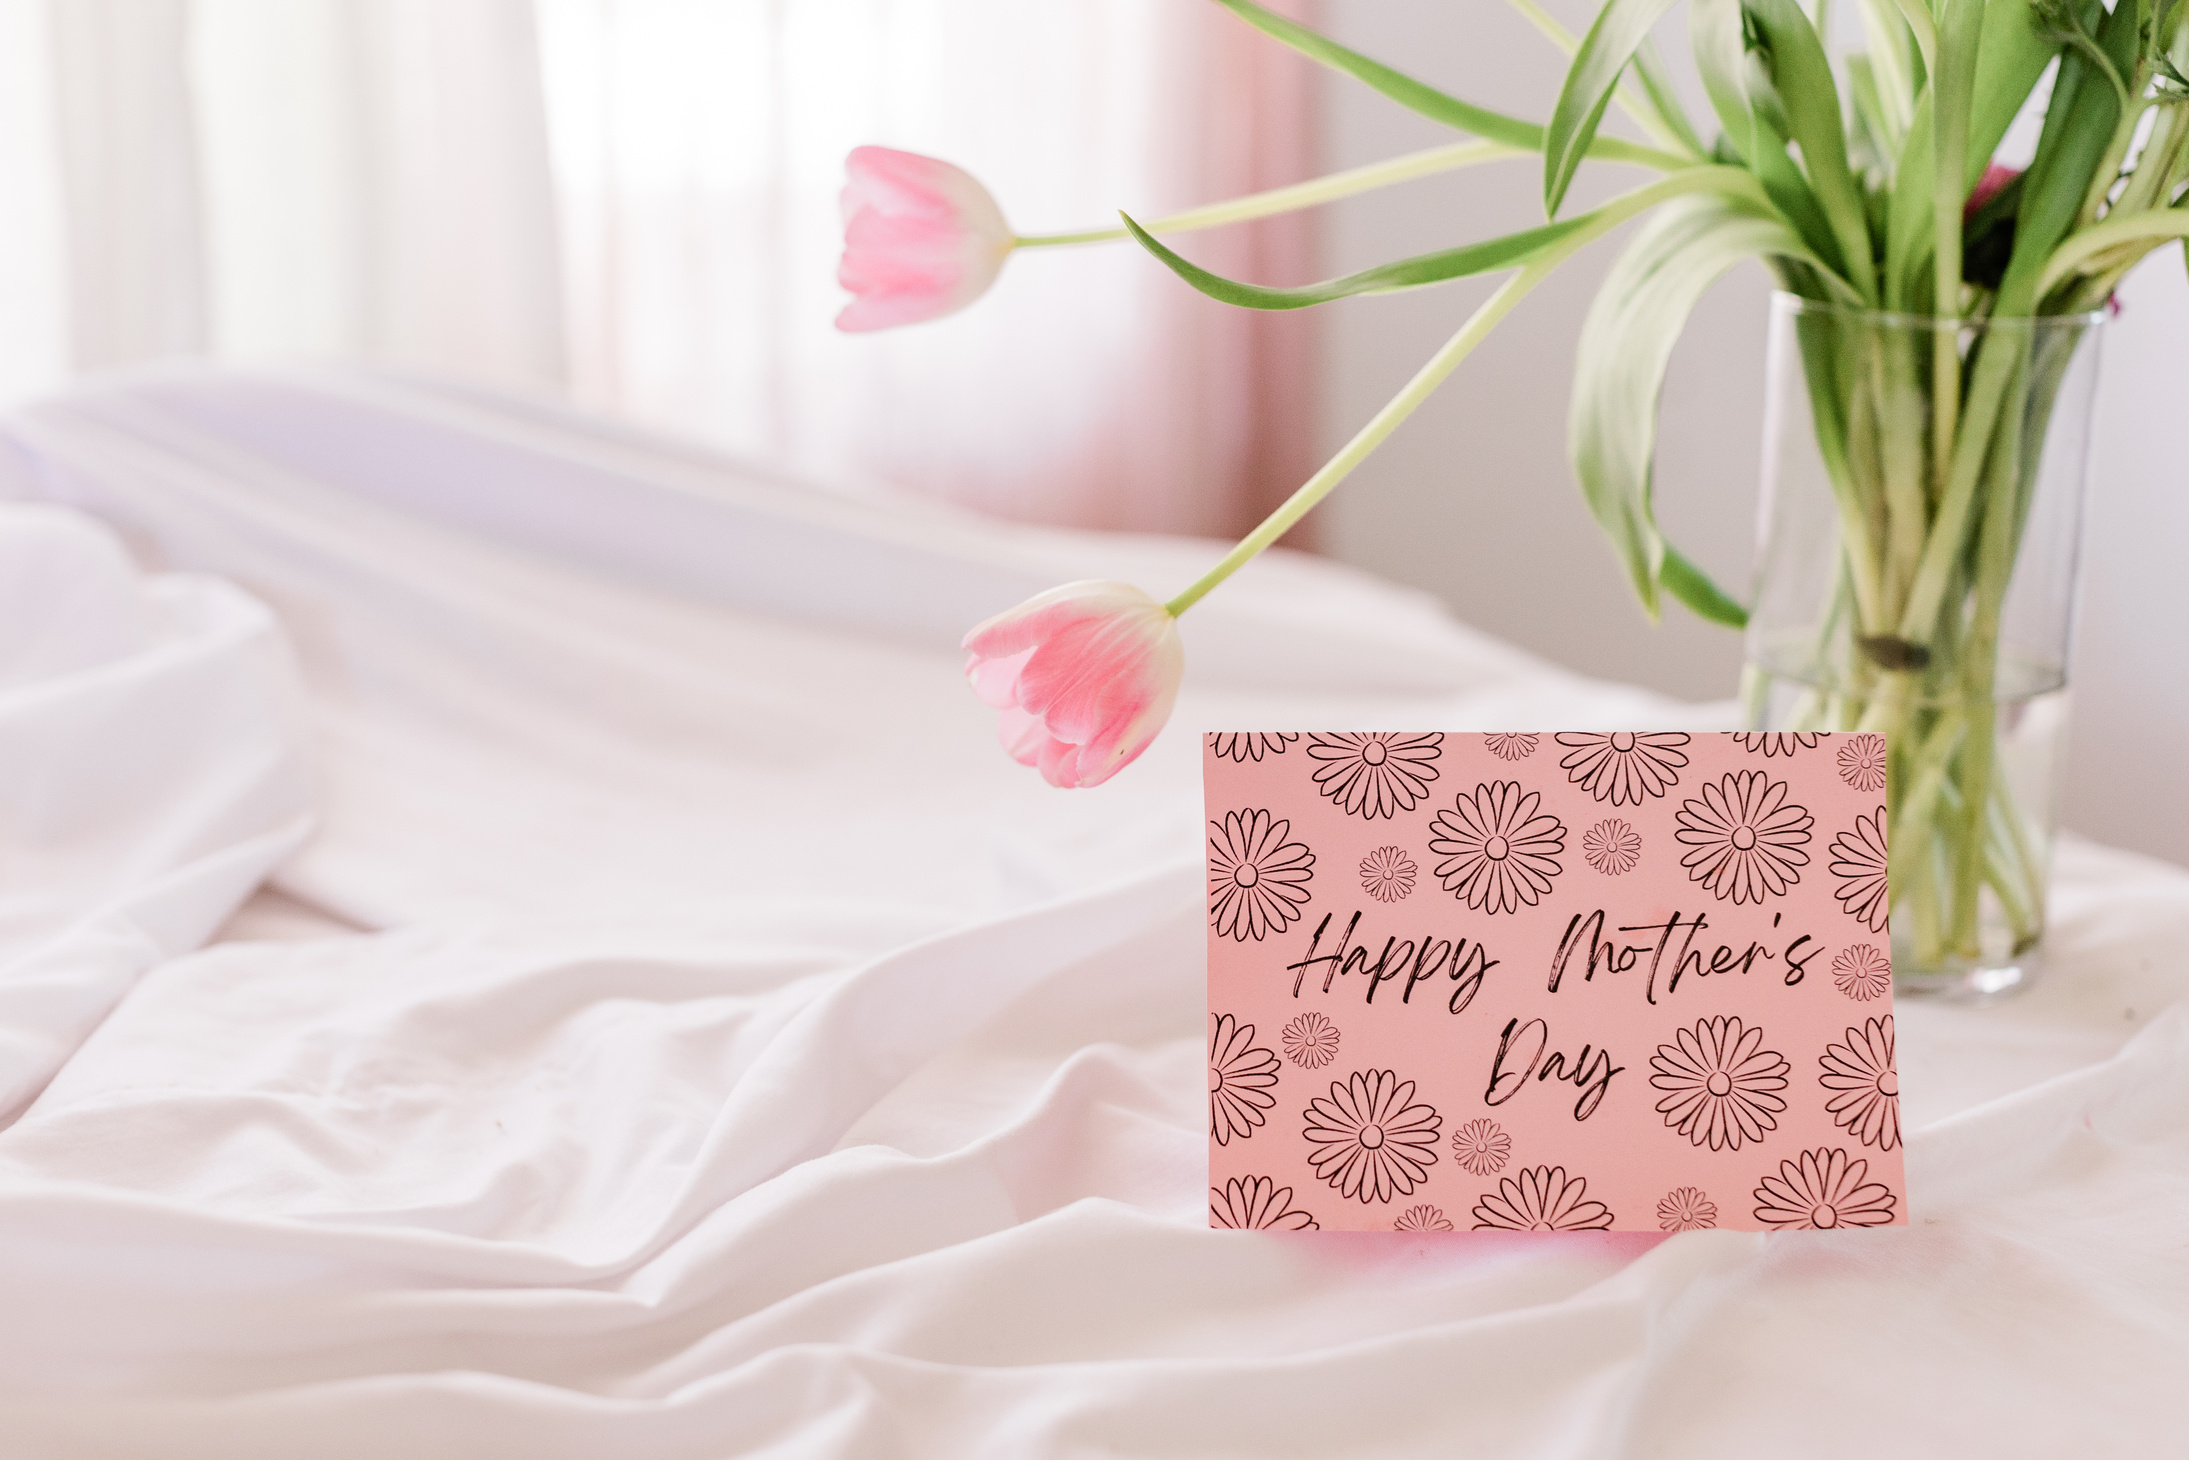 Mother's Day Letter with Fresh Flowers in Vase